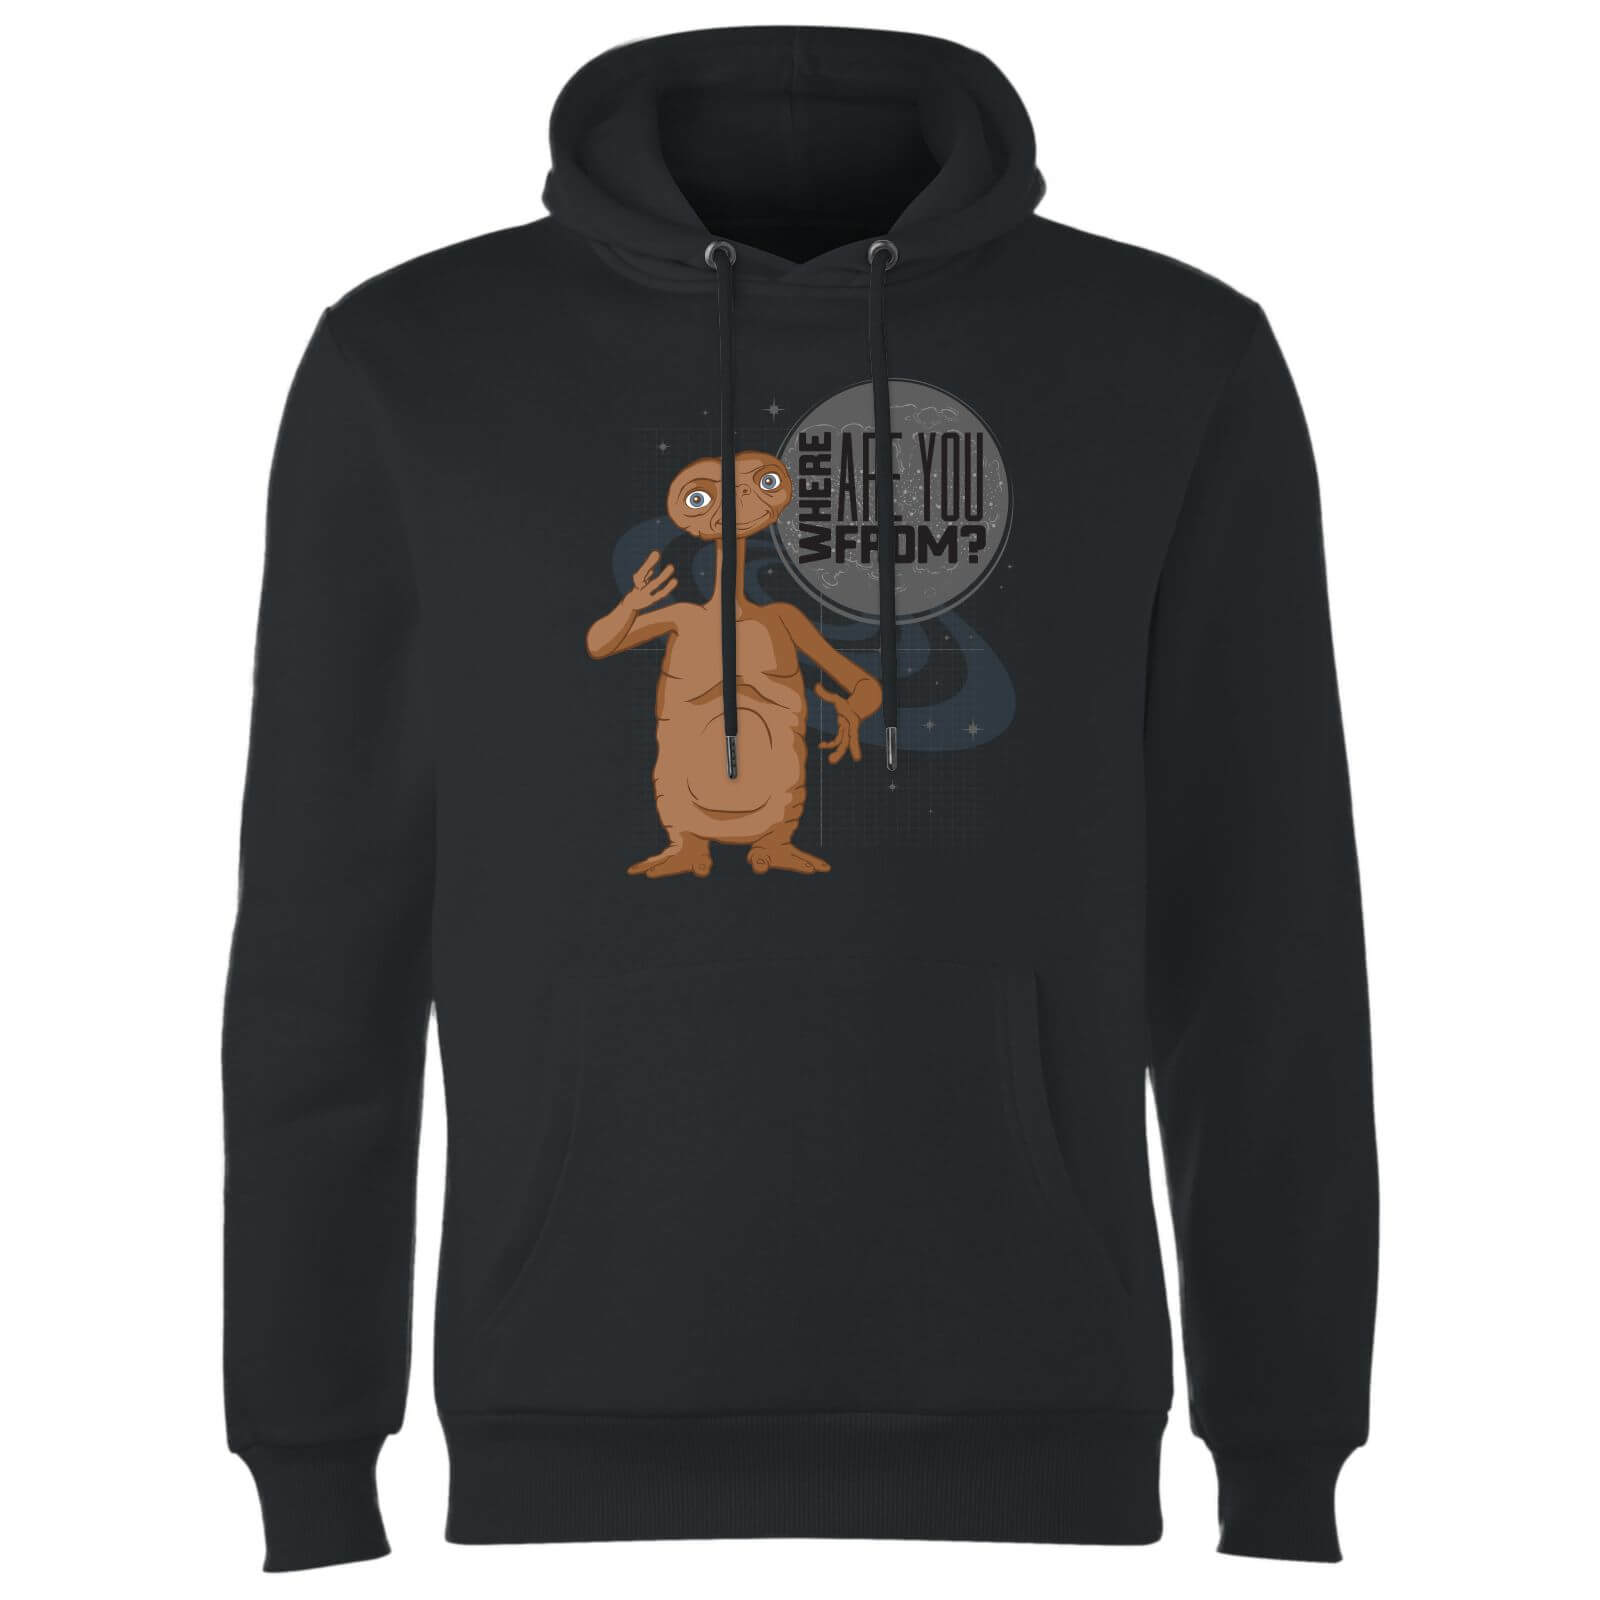 ET Where Are You From Hoodie - Black - XXL - Black